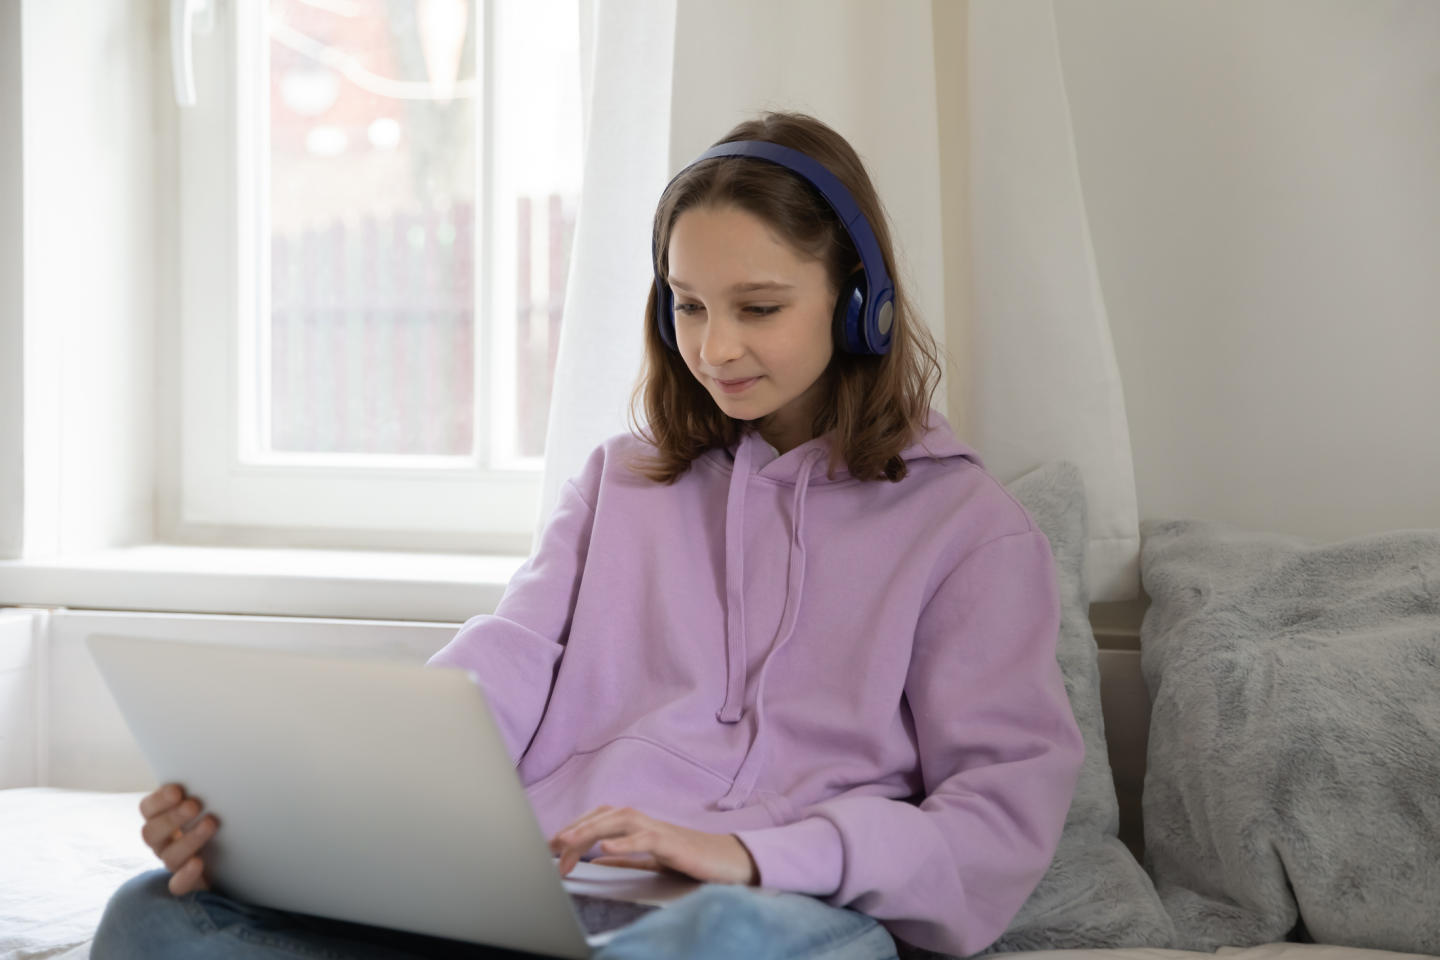 Female teenager using a laptop.